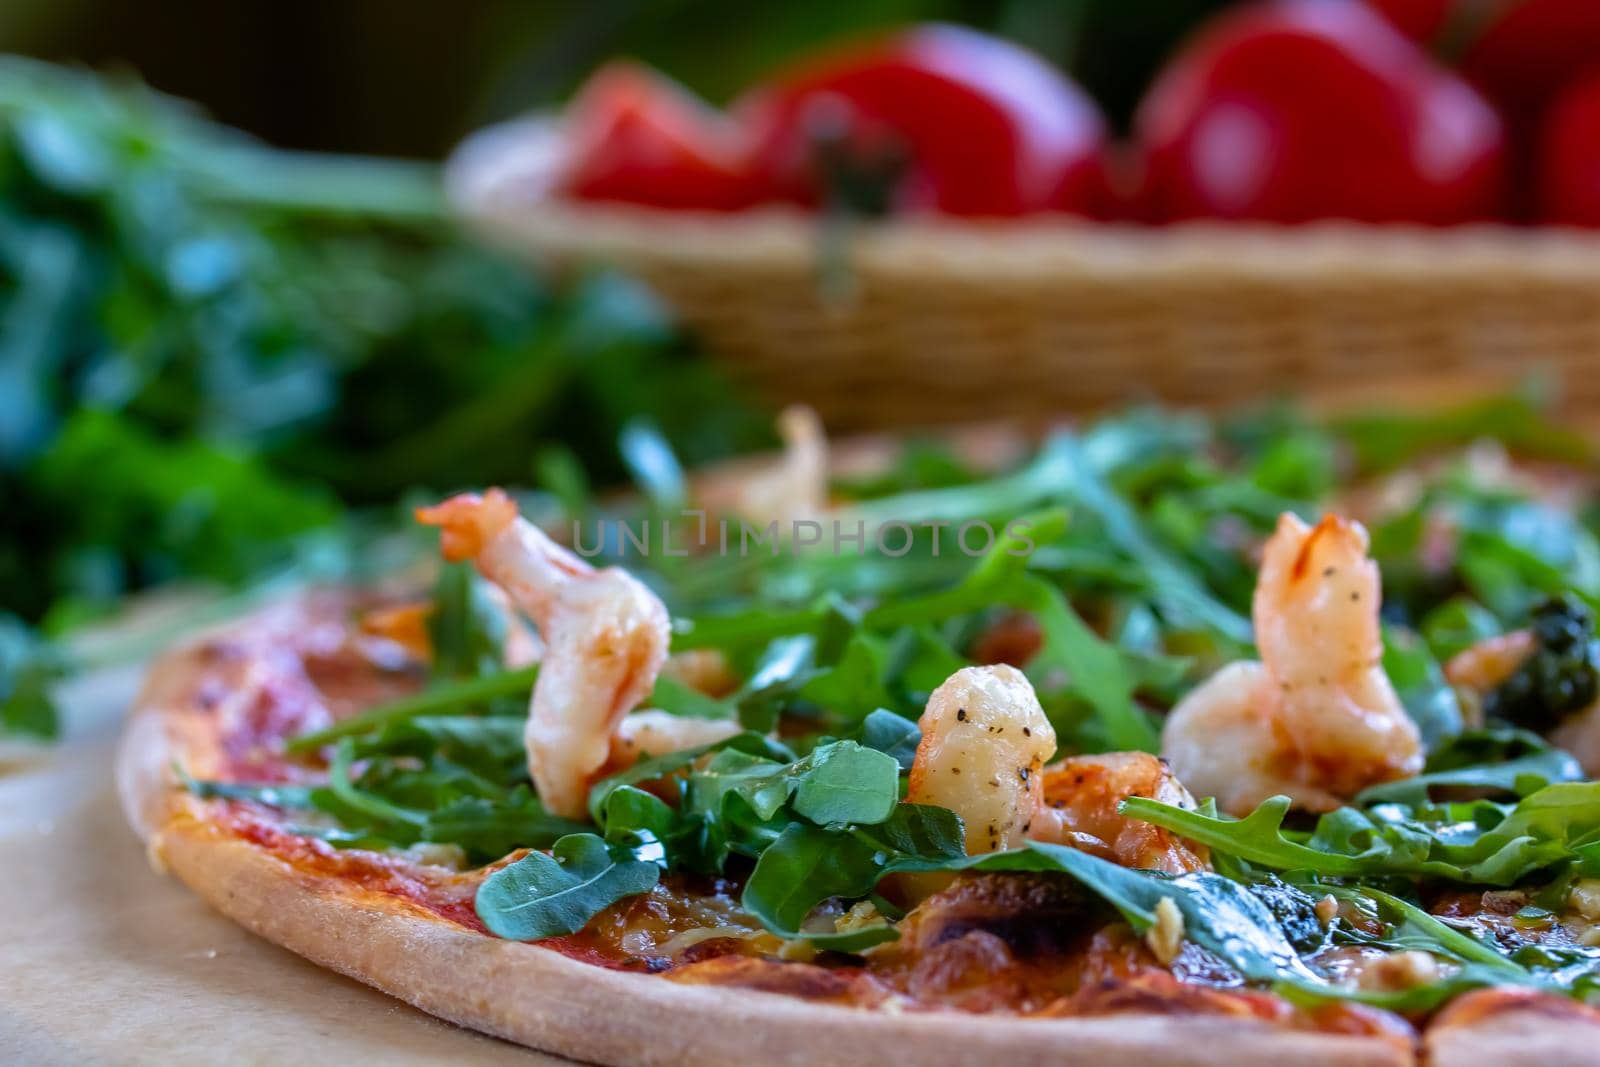 Delicious rustic Italian pizza with grilled Adriatic shrimps, mozzarella, sun dried tomatoes, arugula and parmesan cheese by Milanchikov